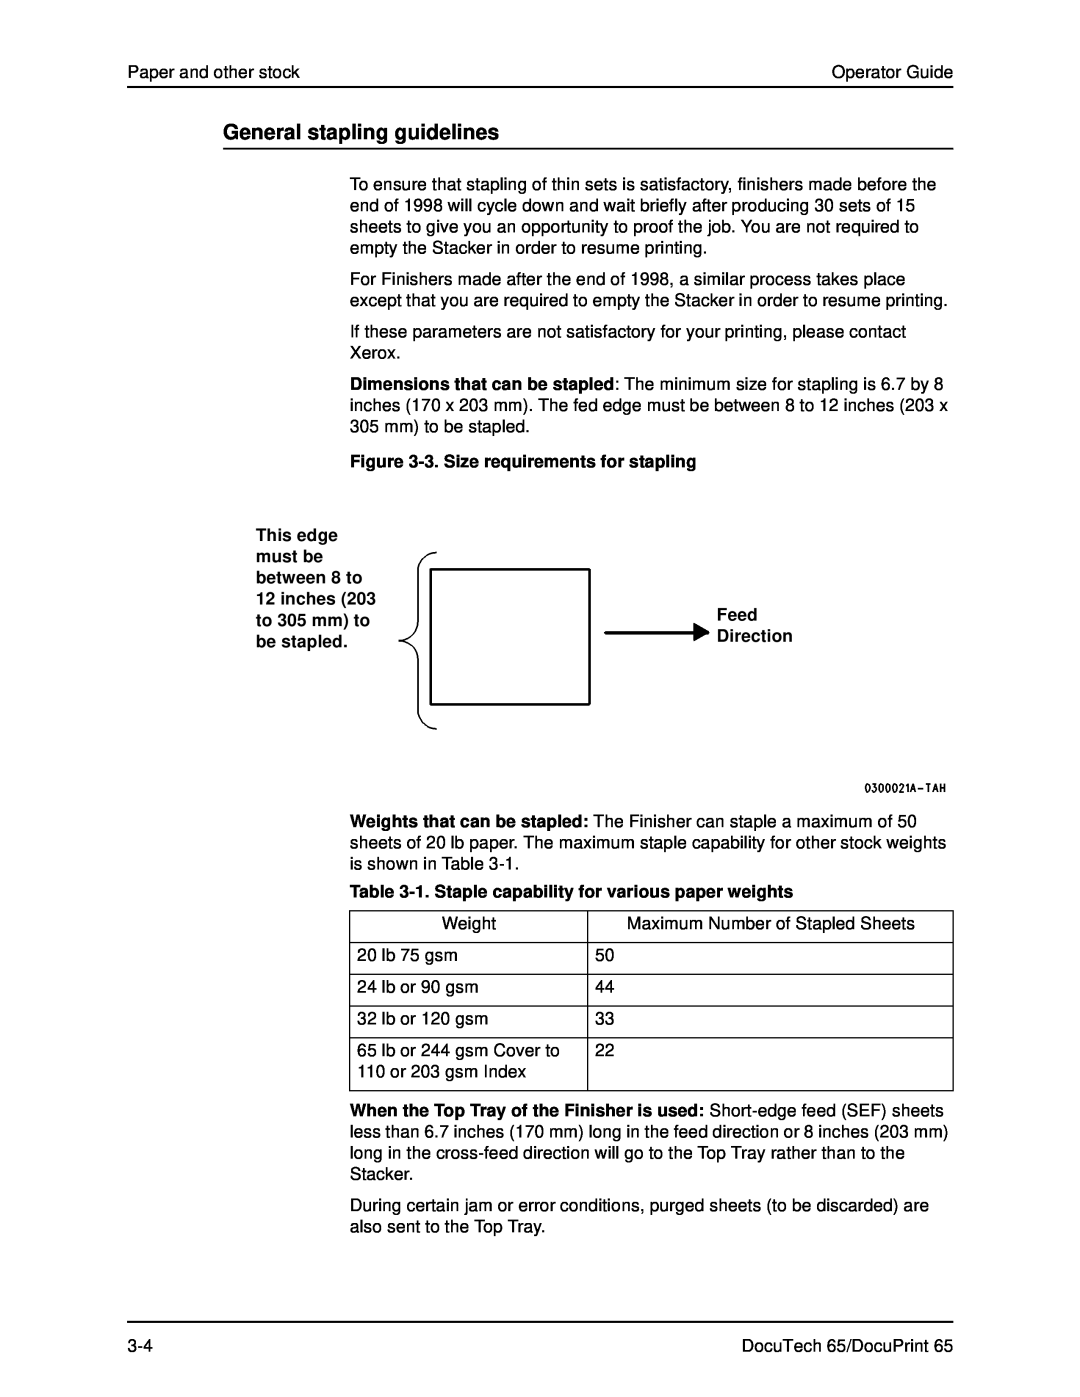 Xerox DOCUTECH 65 General stapling guidelines, 3. Size requirements for stapling, This edge, must be, between 8 to, inches 